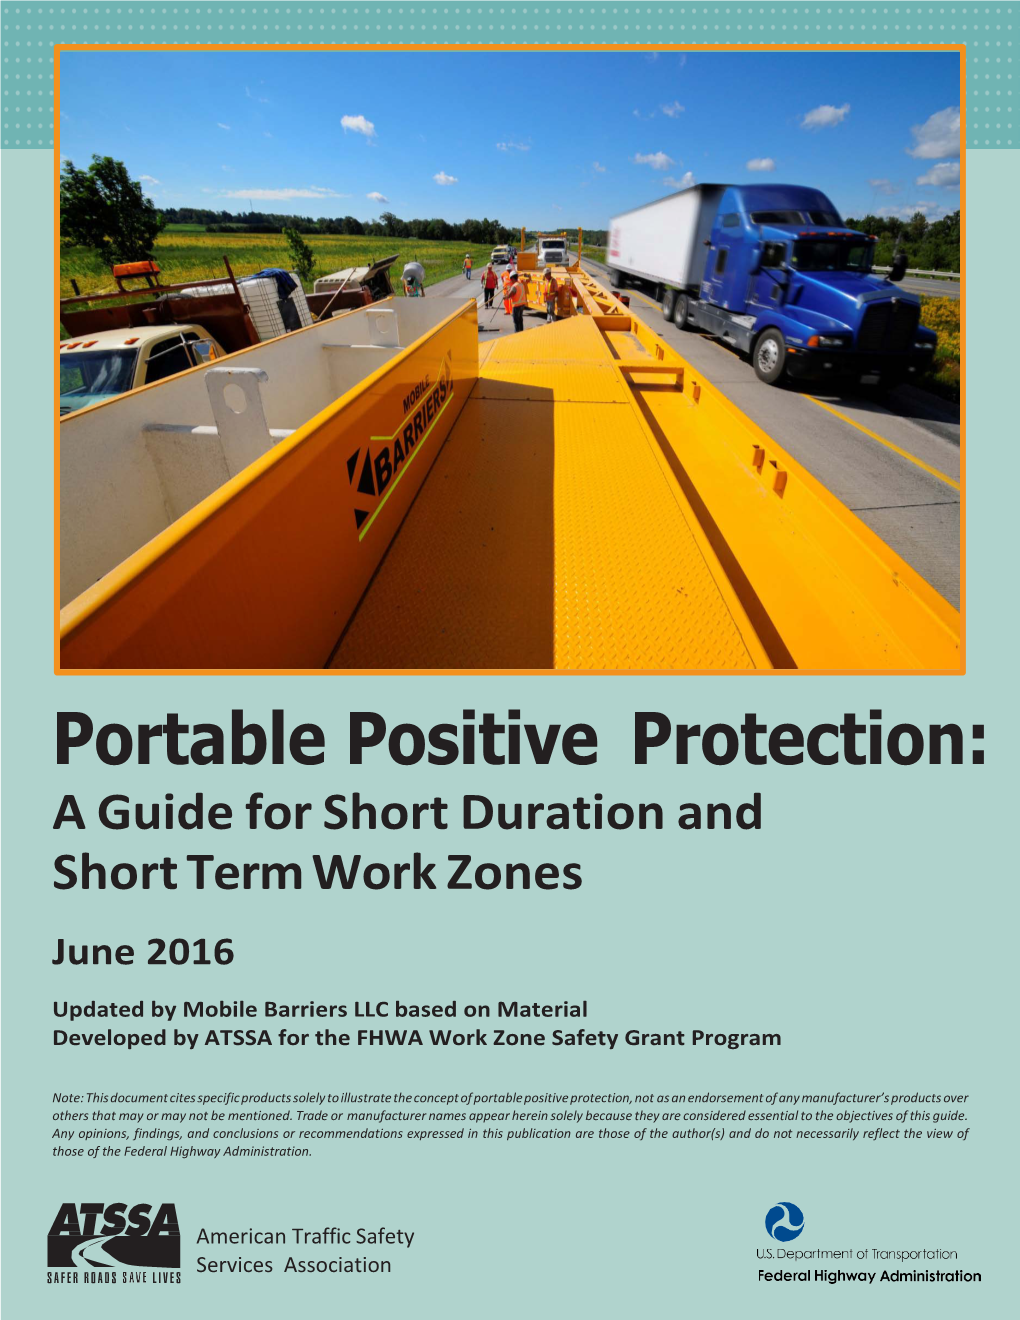 Portable Positive Protection: a Guide for Short Duration and Short Term Work Zones June 2016